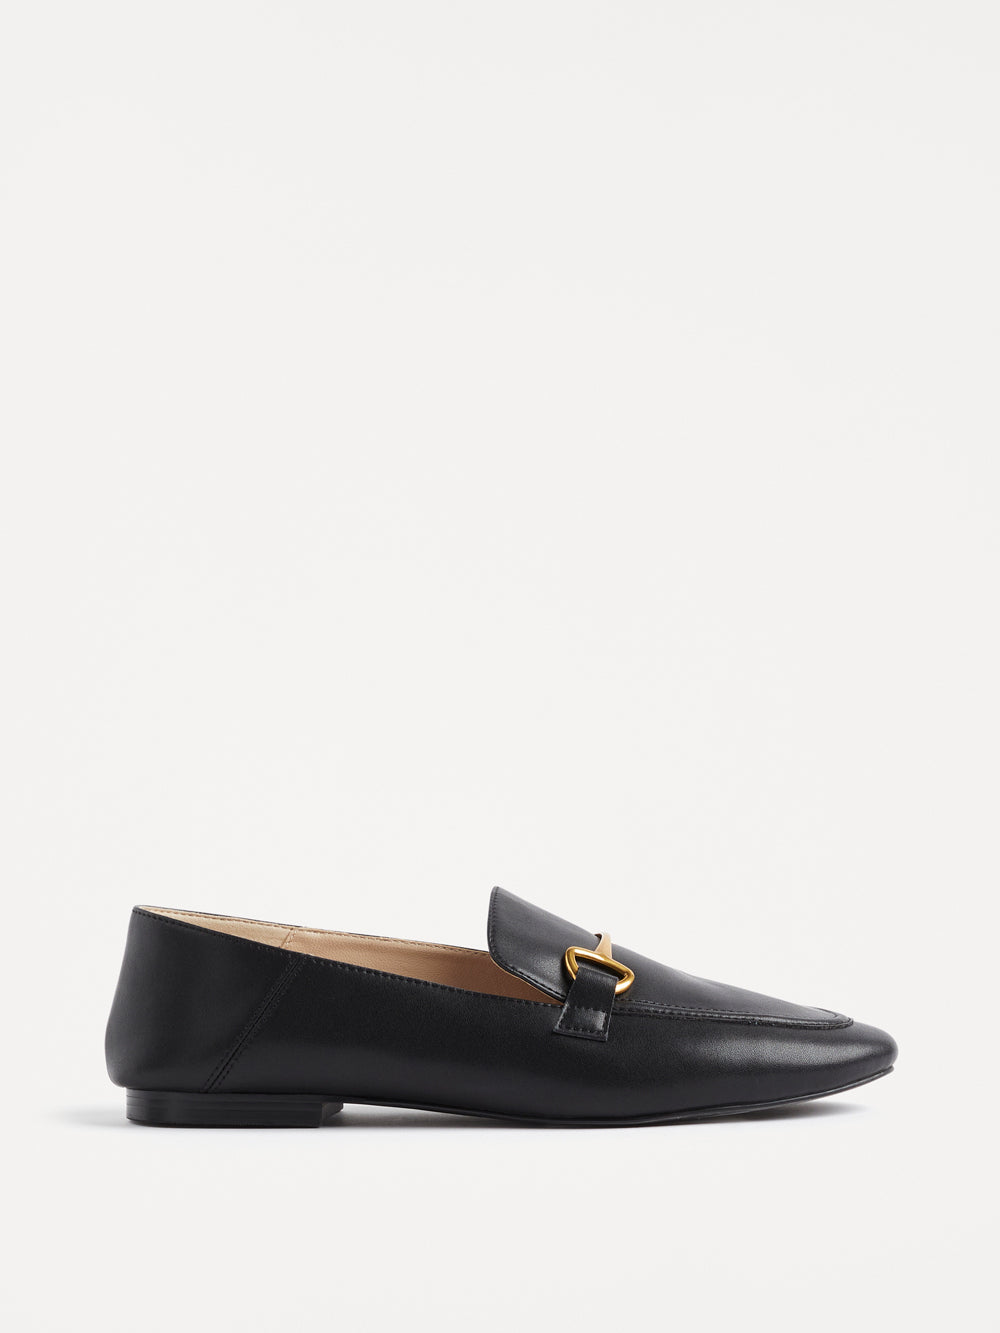 The Simone Loafer